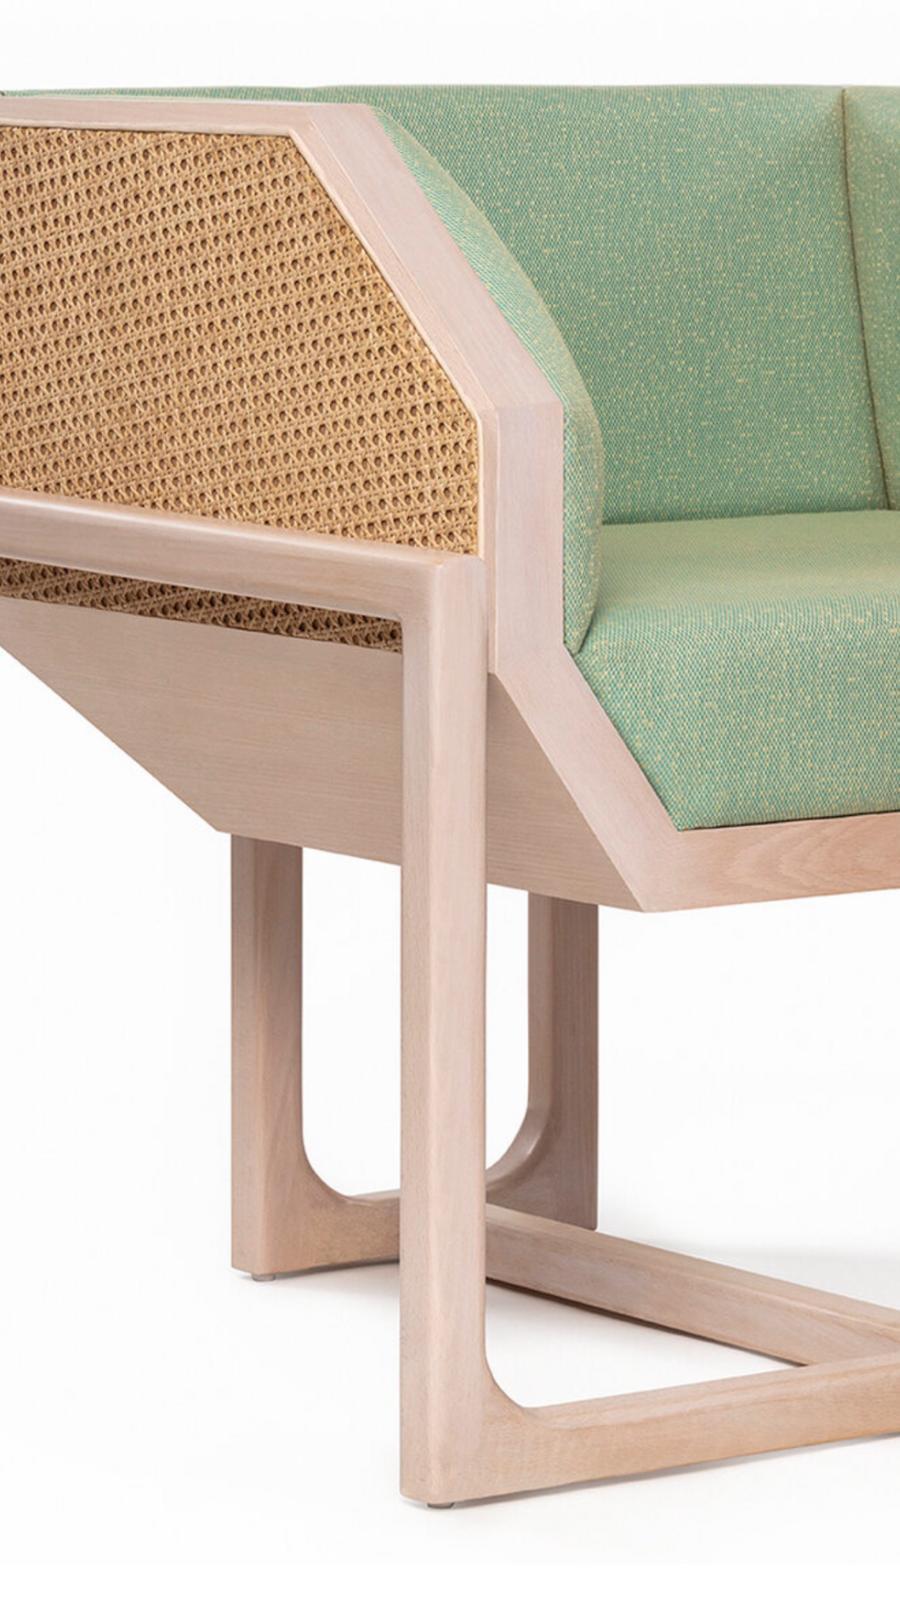 Hand-Crafted Mid-Century Modern Style Wood Armchair with Woven Cane Upholstered in Textile